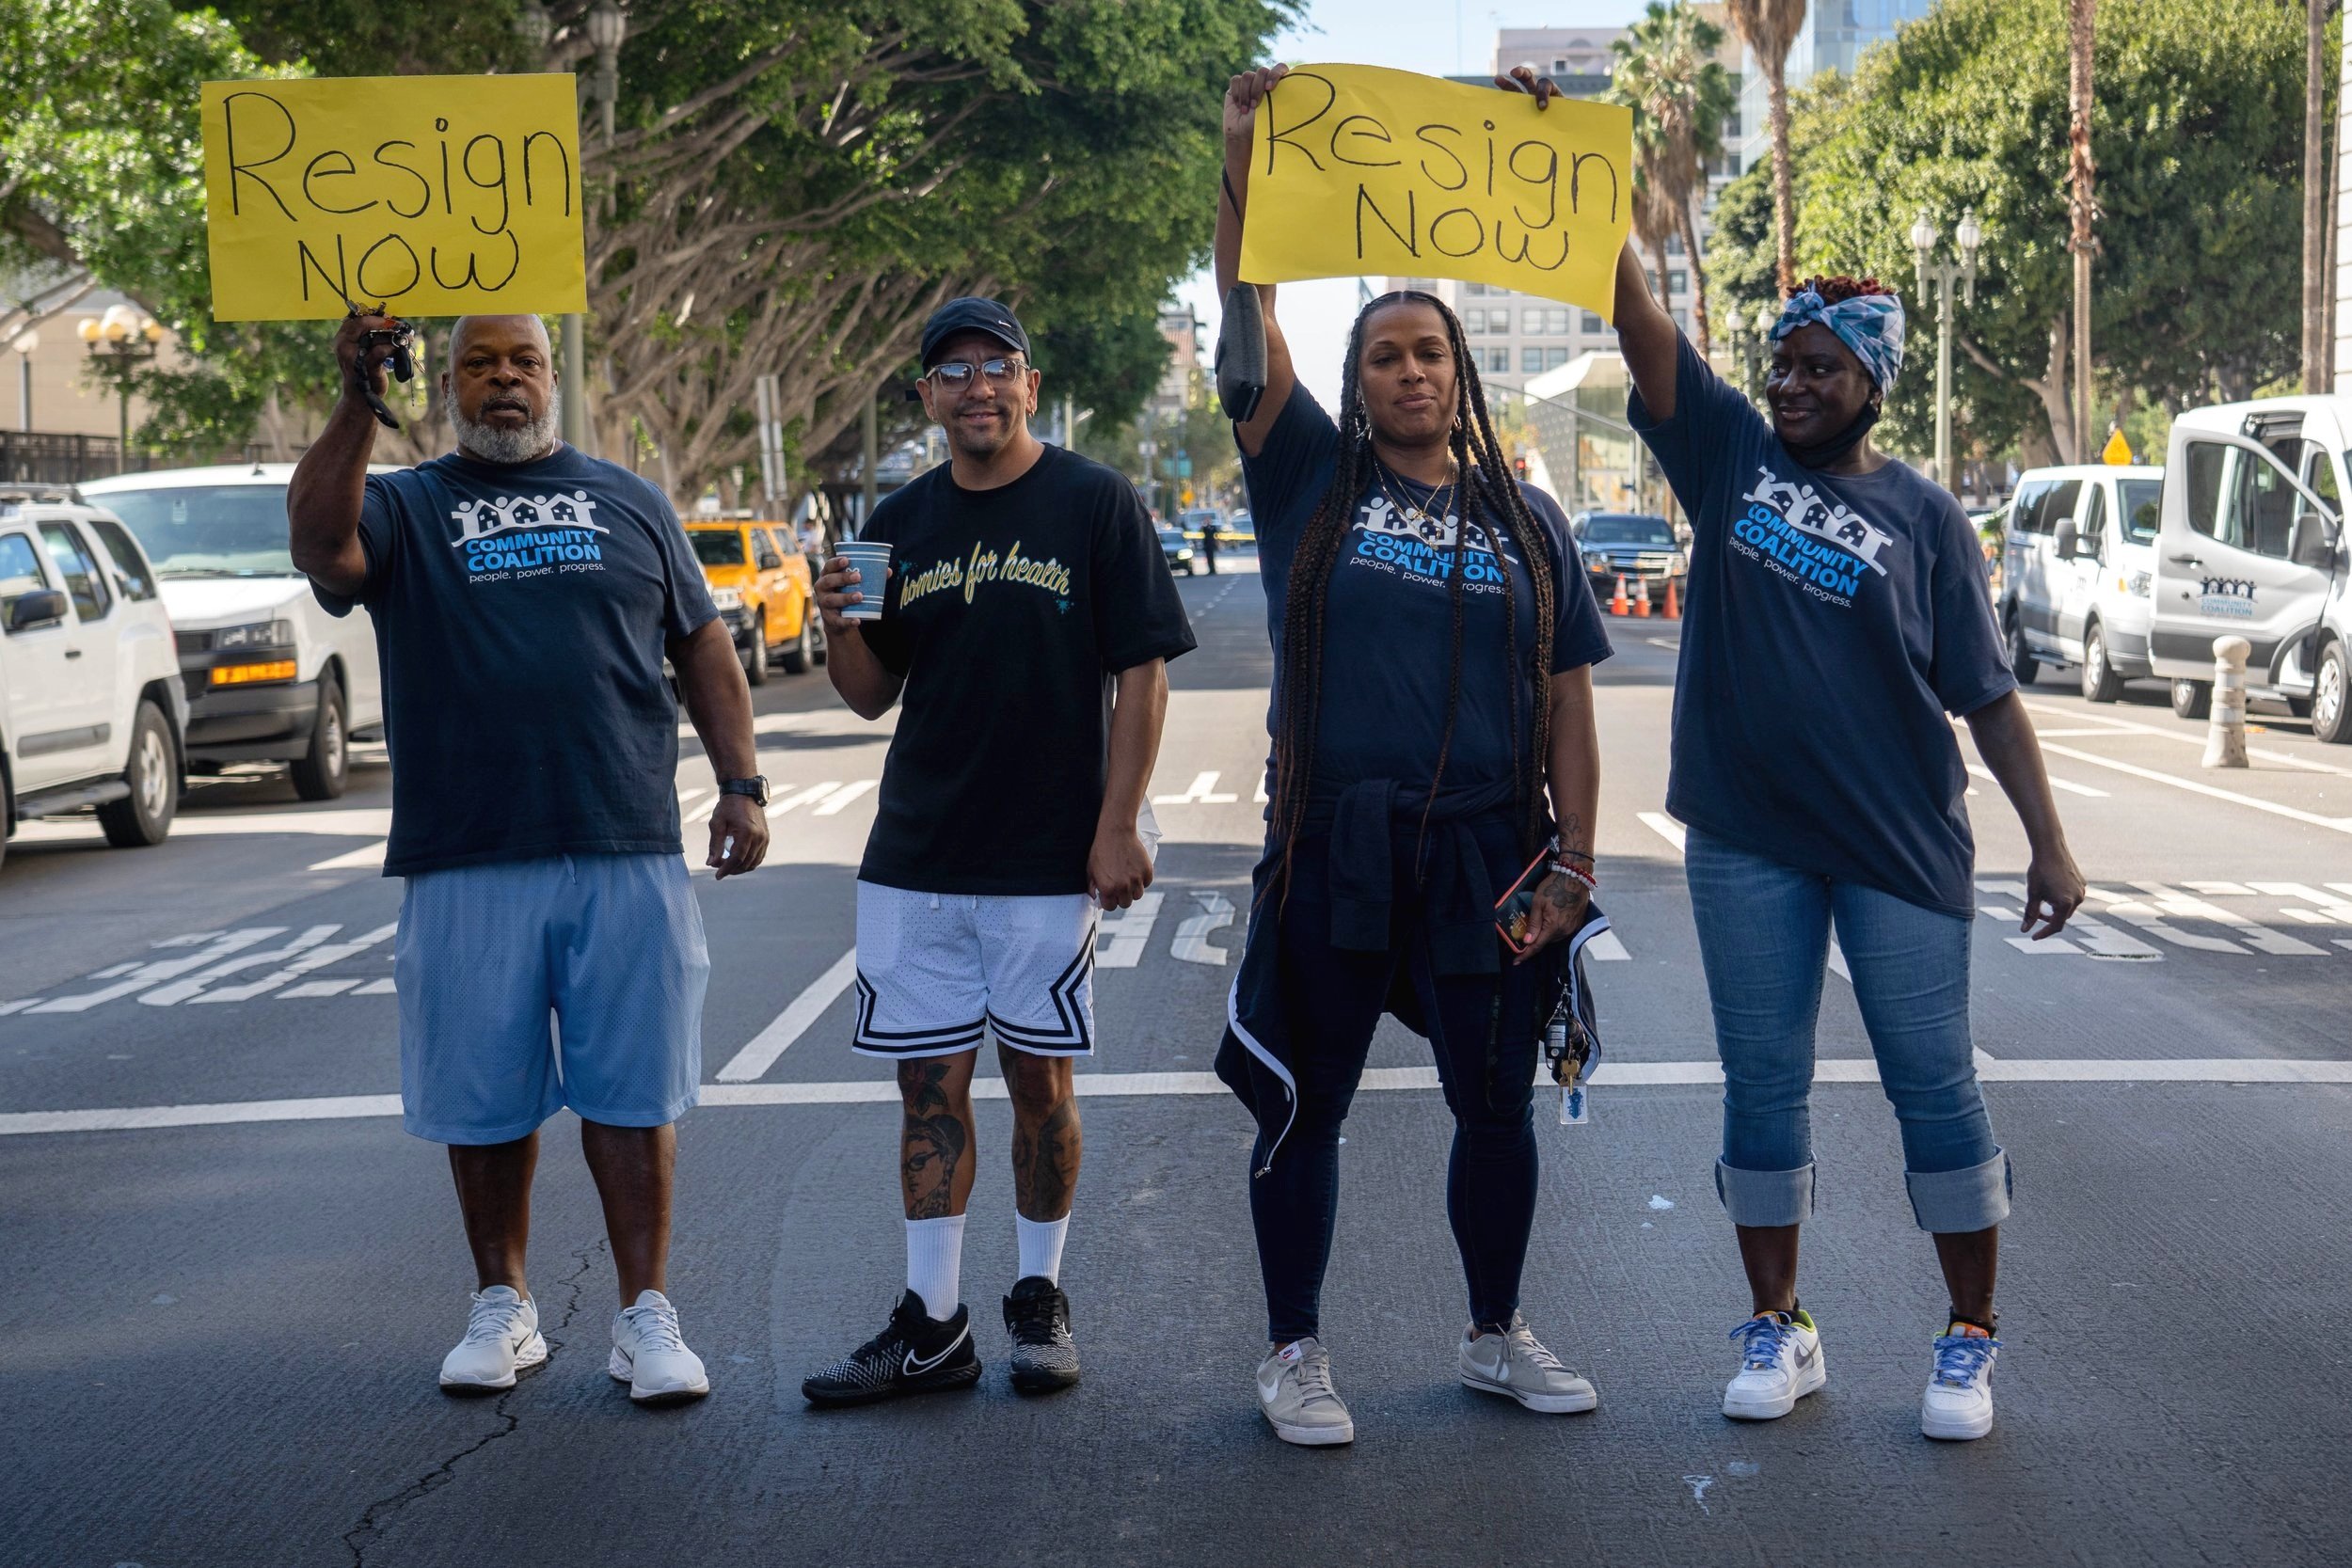  Demonstrators display protest messages at the entrance of Los Angeles City Hall Tuesday, Oct 18 2022. Multiple activist organizations are demanding the resignation of council members caught making racially charged comments.(Anthony Clingerman | The 